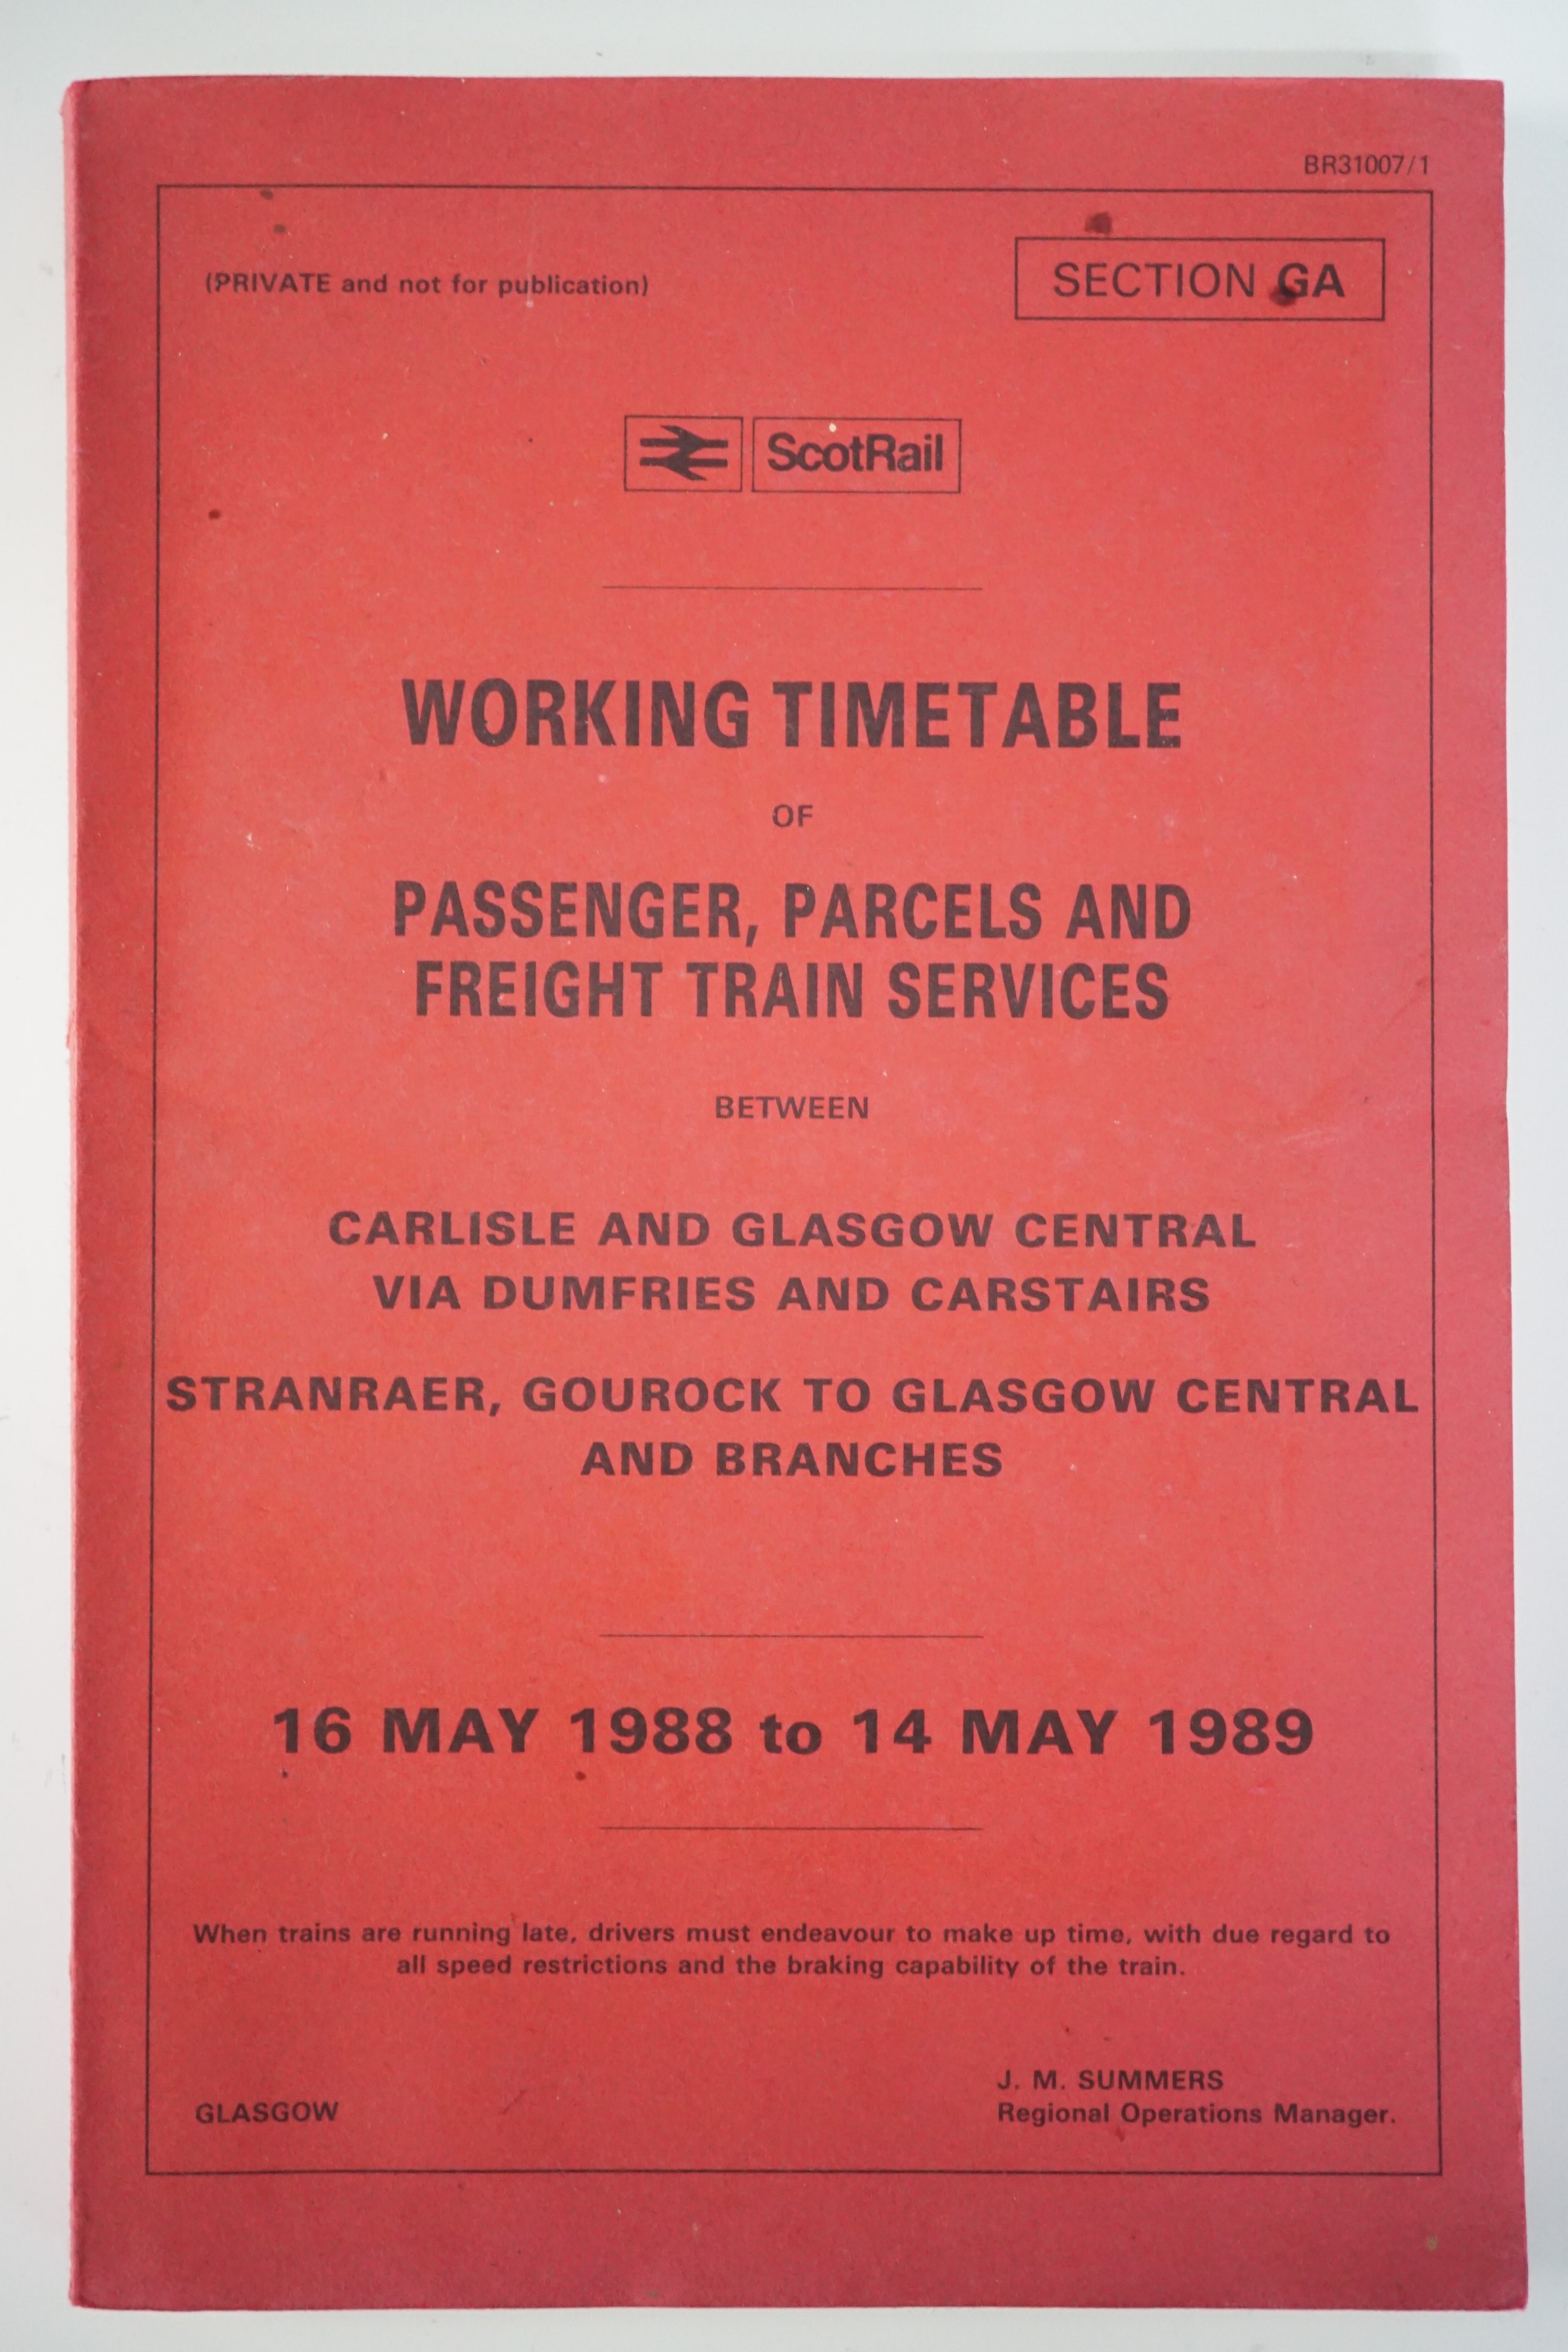 A 1953 British Railways booklet and 1988-89 Scotrail Working Timetable - Image 2 of 3